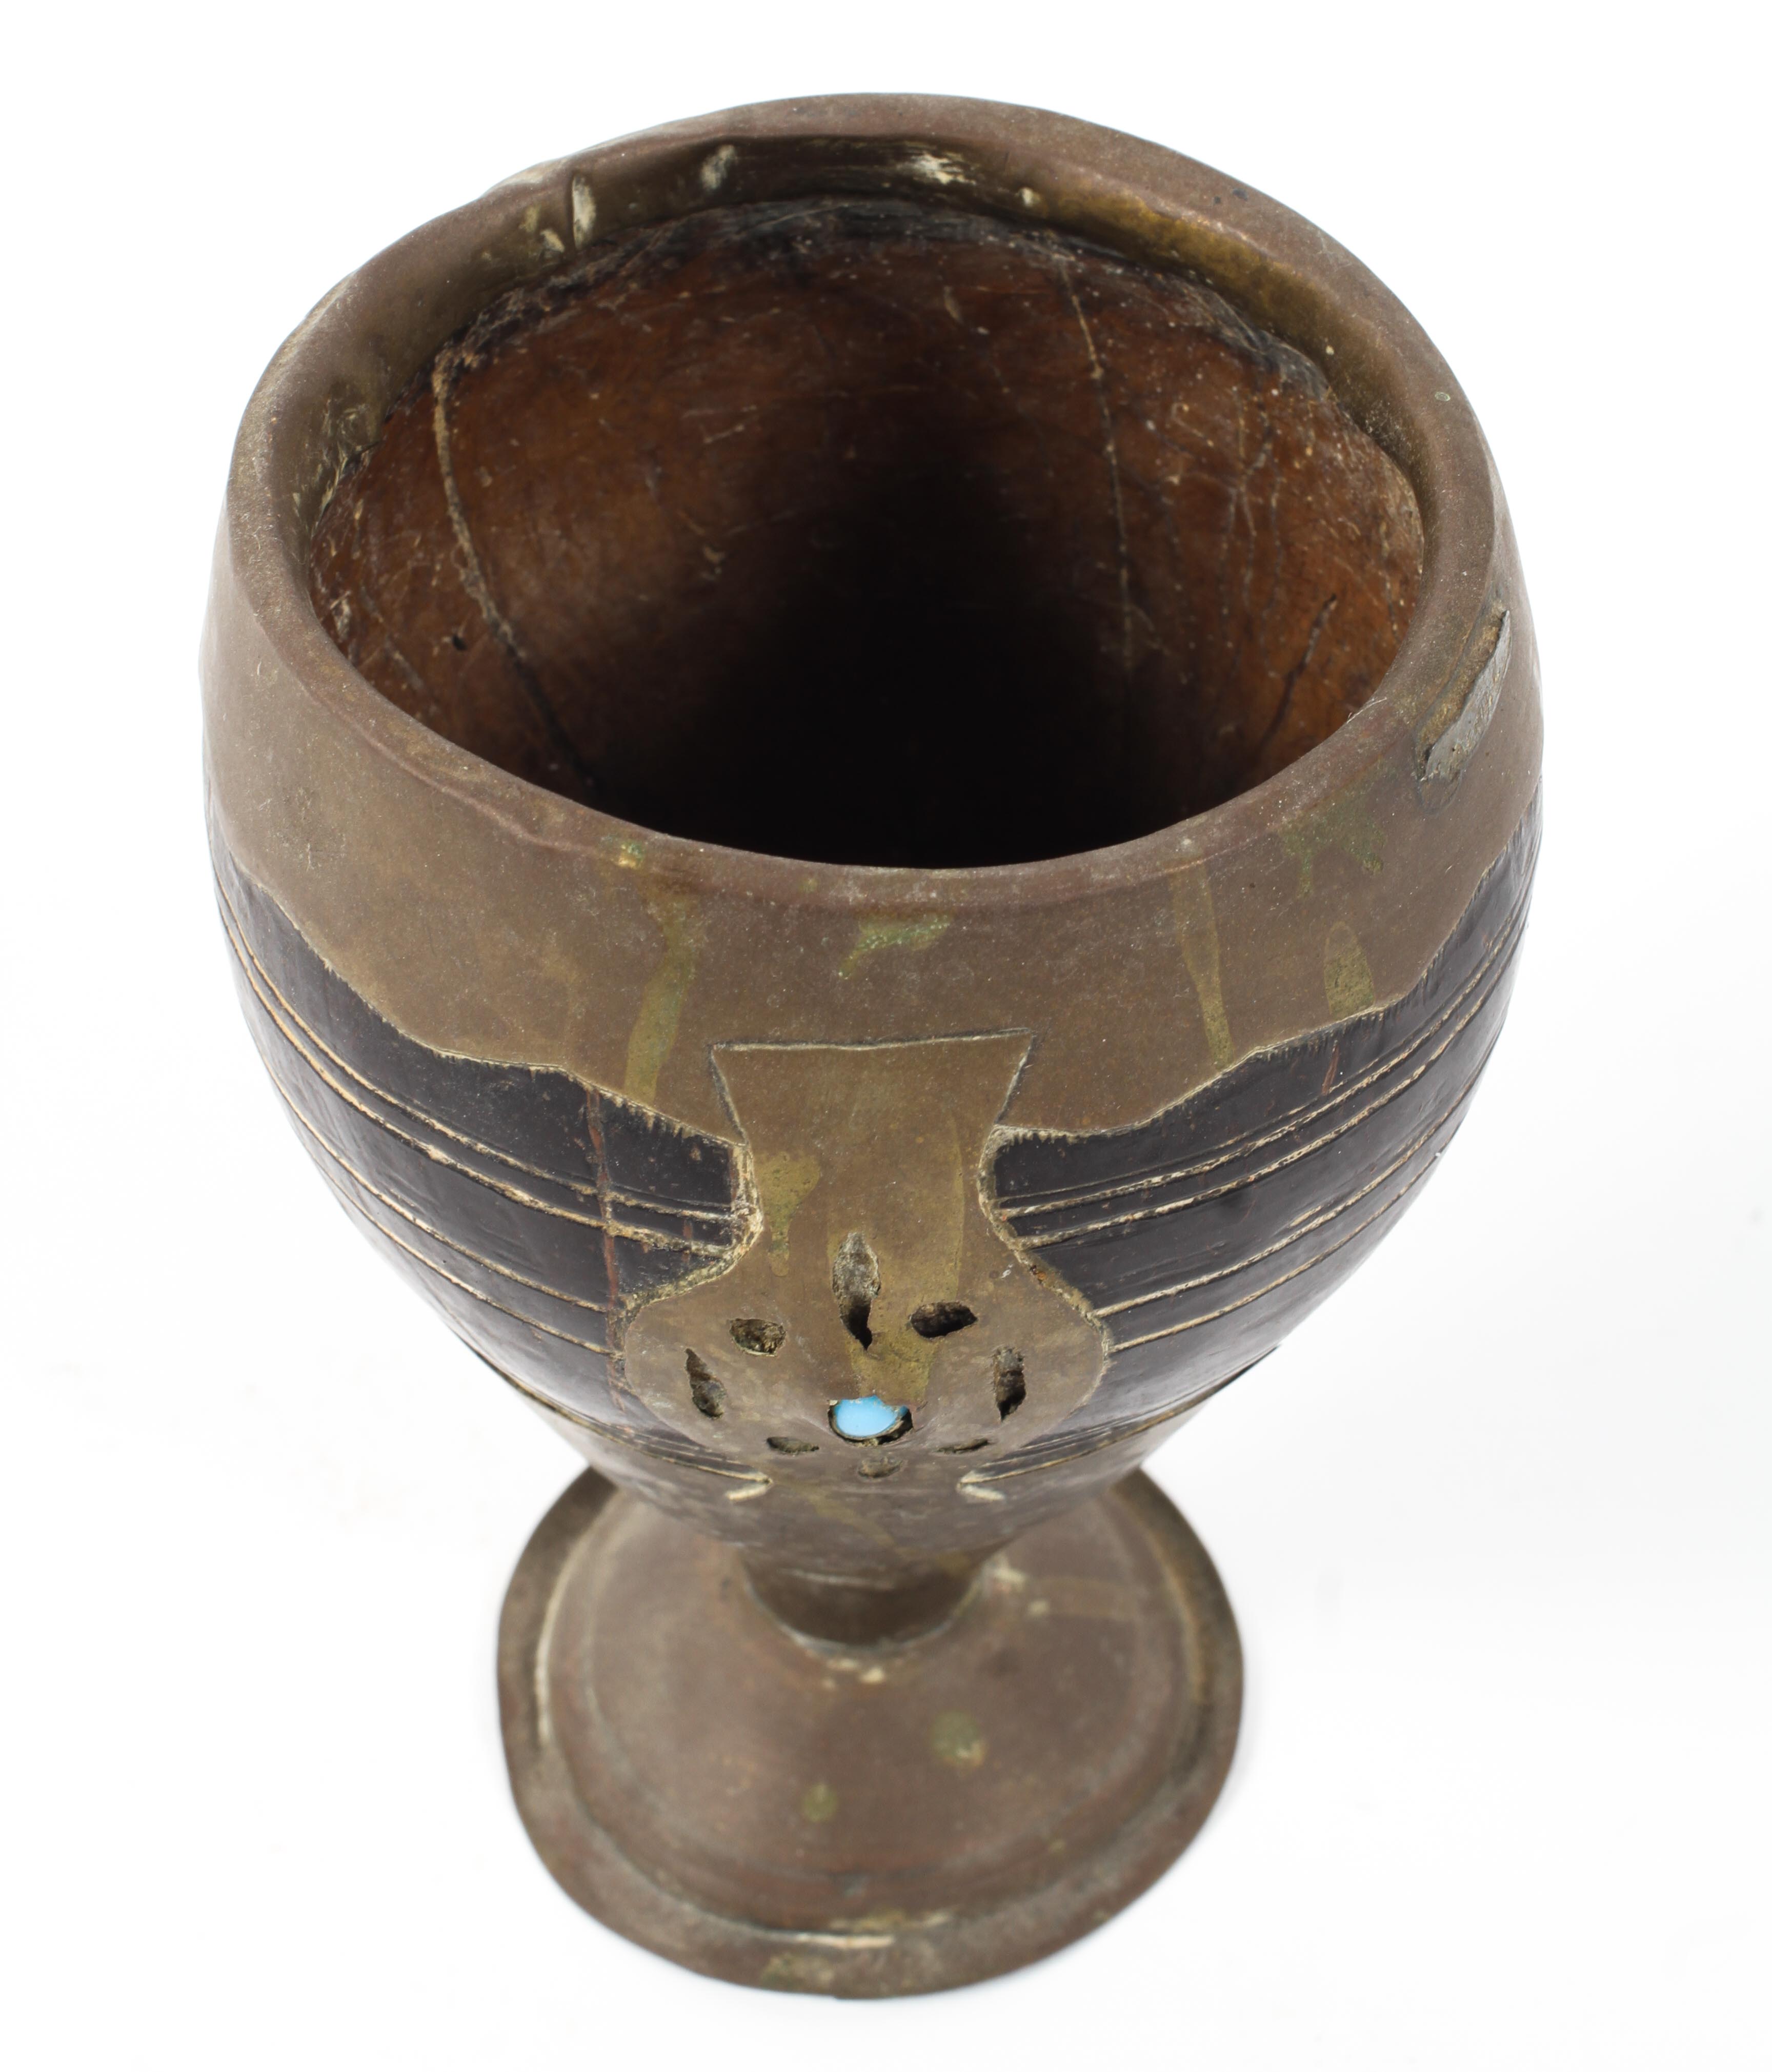 A Middle Eastern Coconut cup set within a brass holder and pedestal decorated with turquoise beads - Image 2 of 2